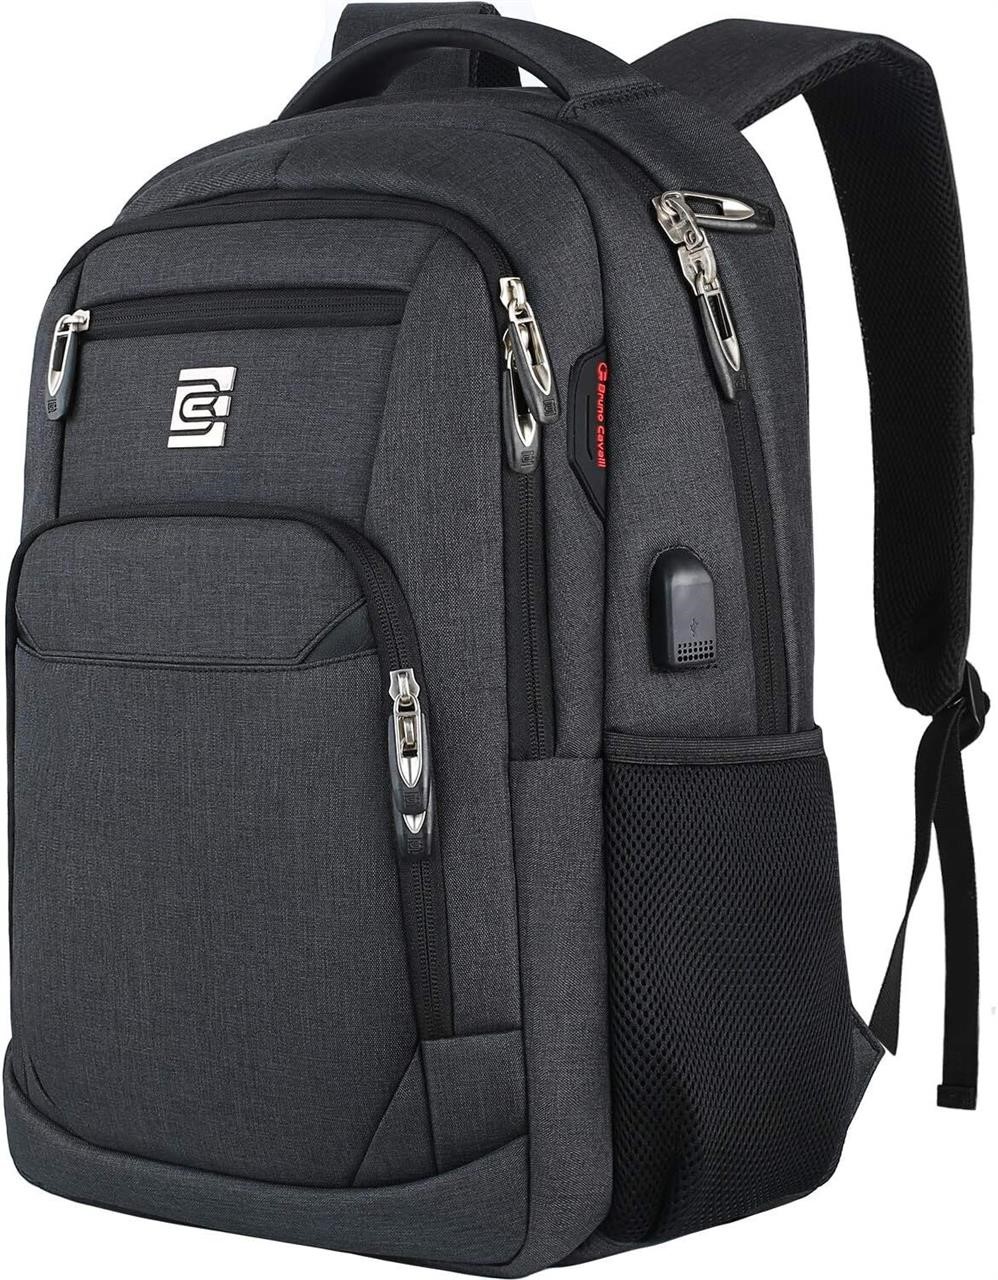 Laptop Backpack  Anti Theft  Fits 15.6 Inch